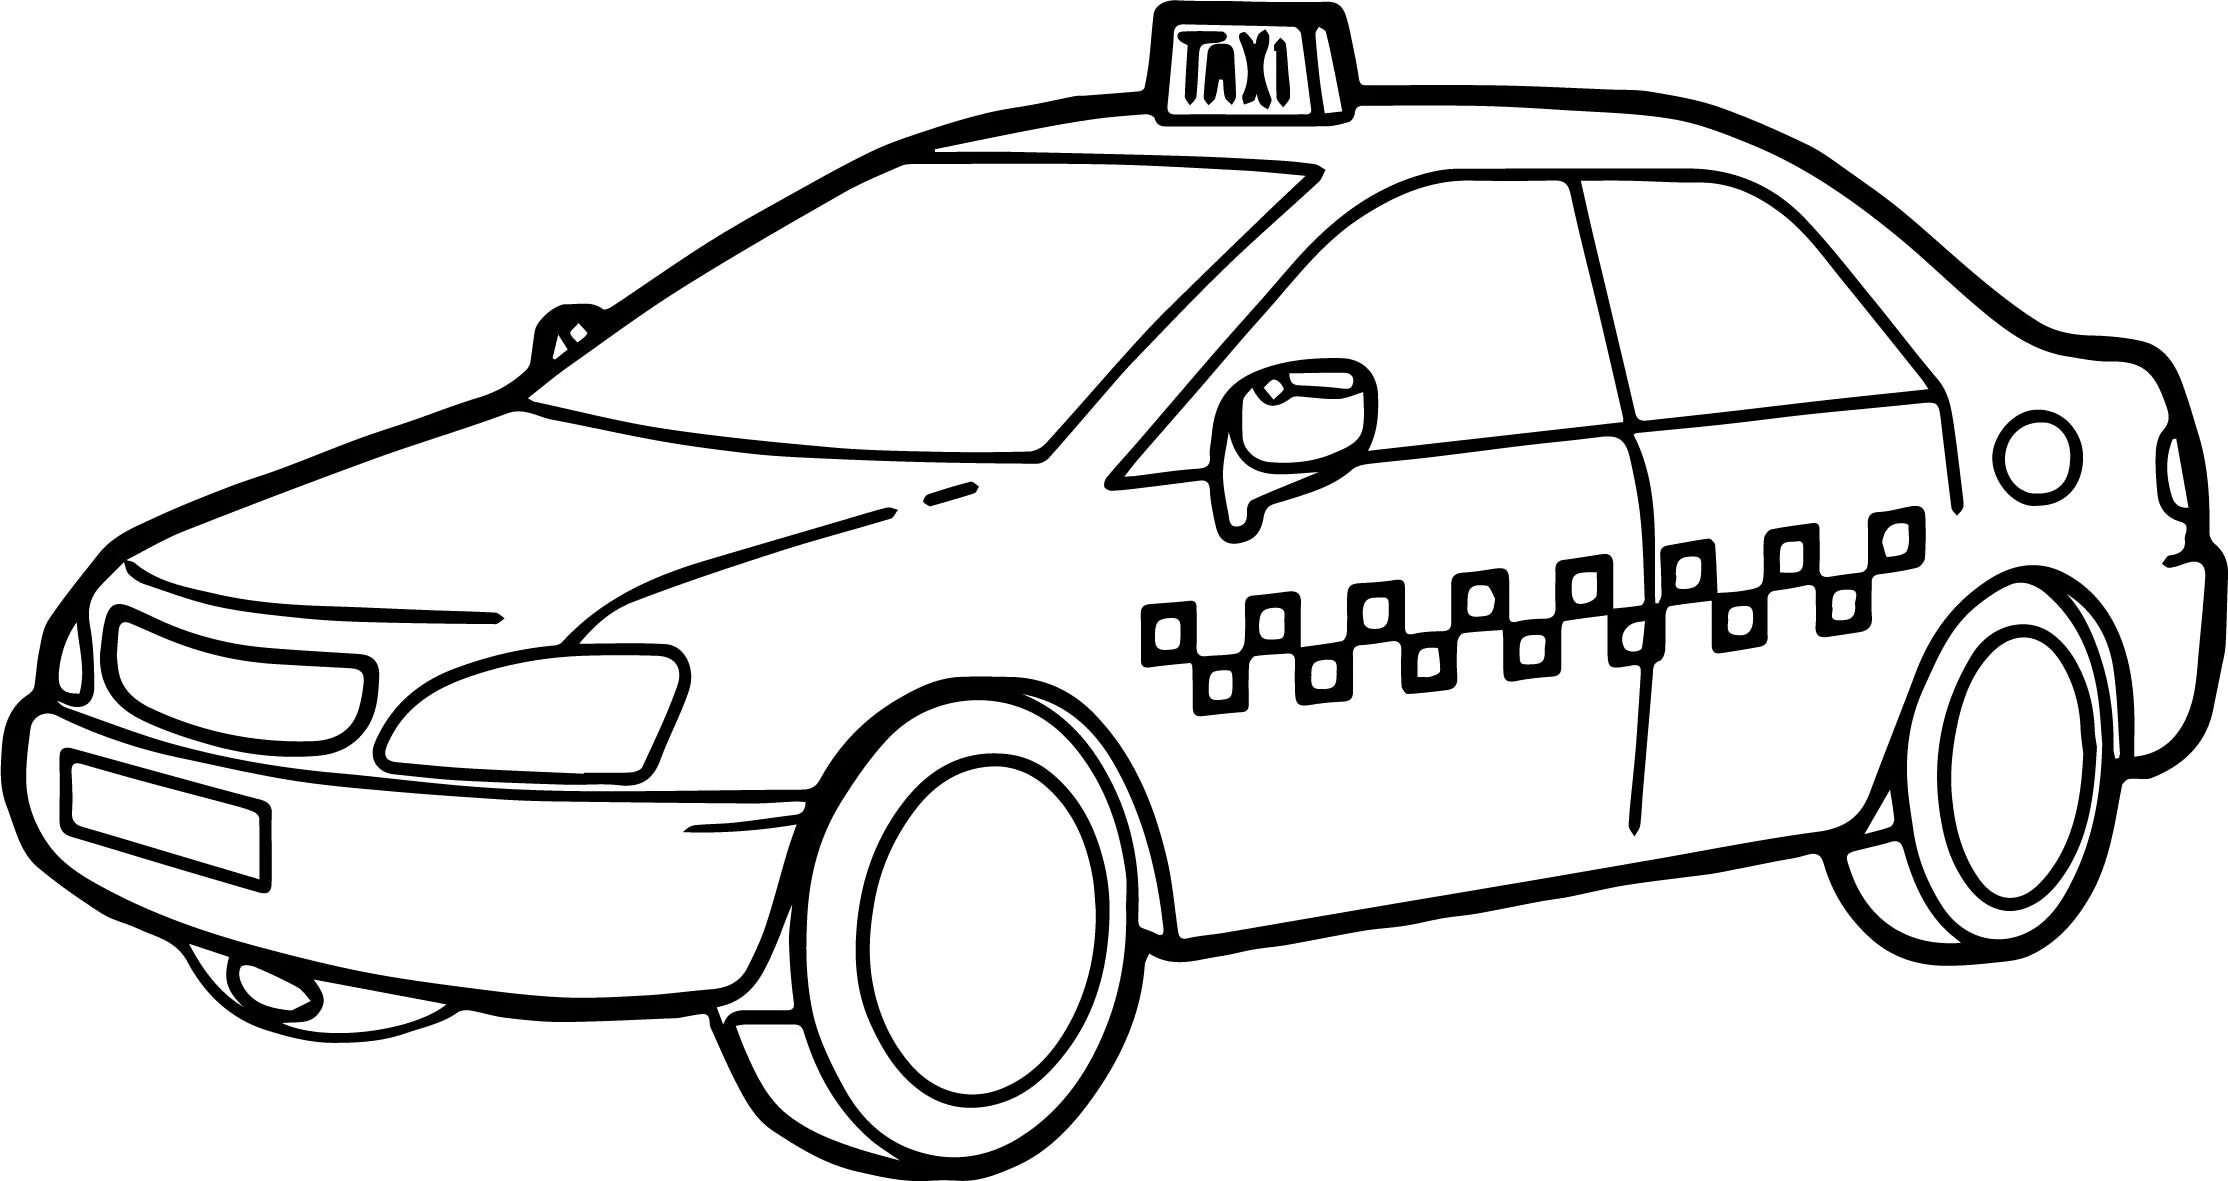 Fabulous taxi car coloring page